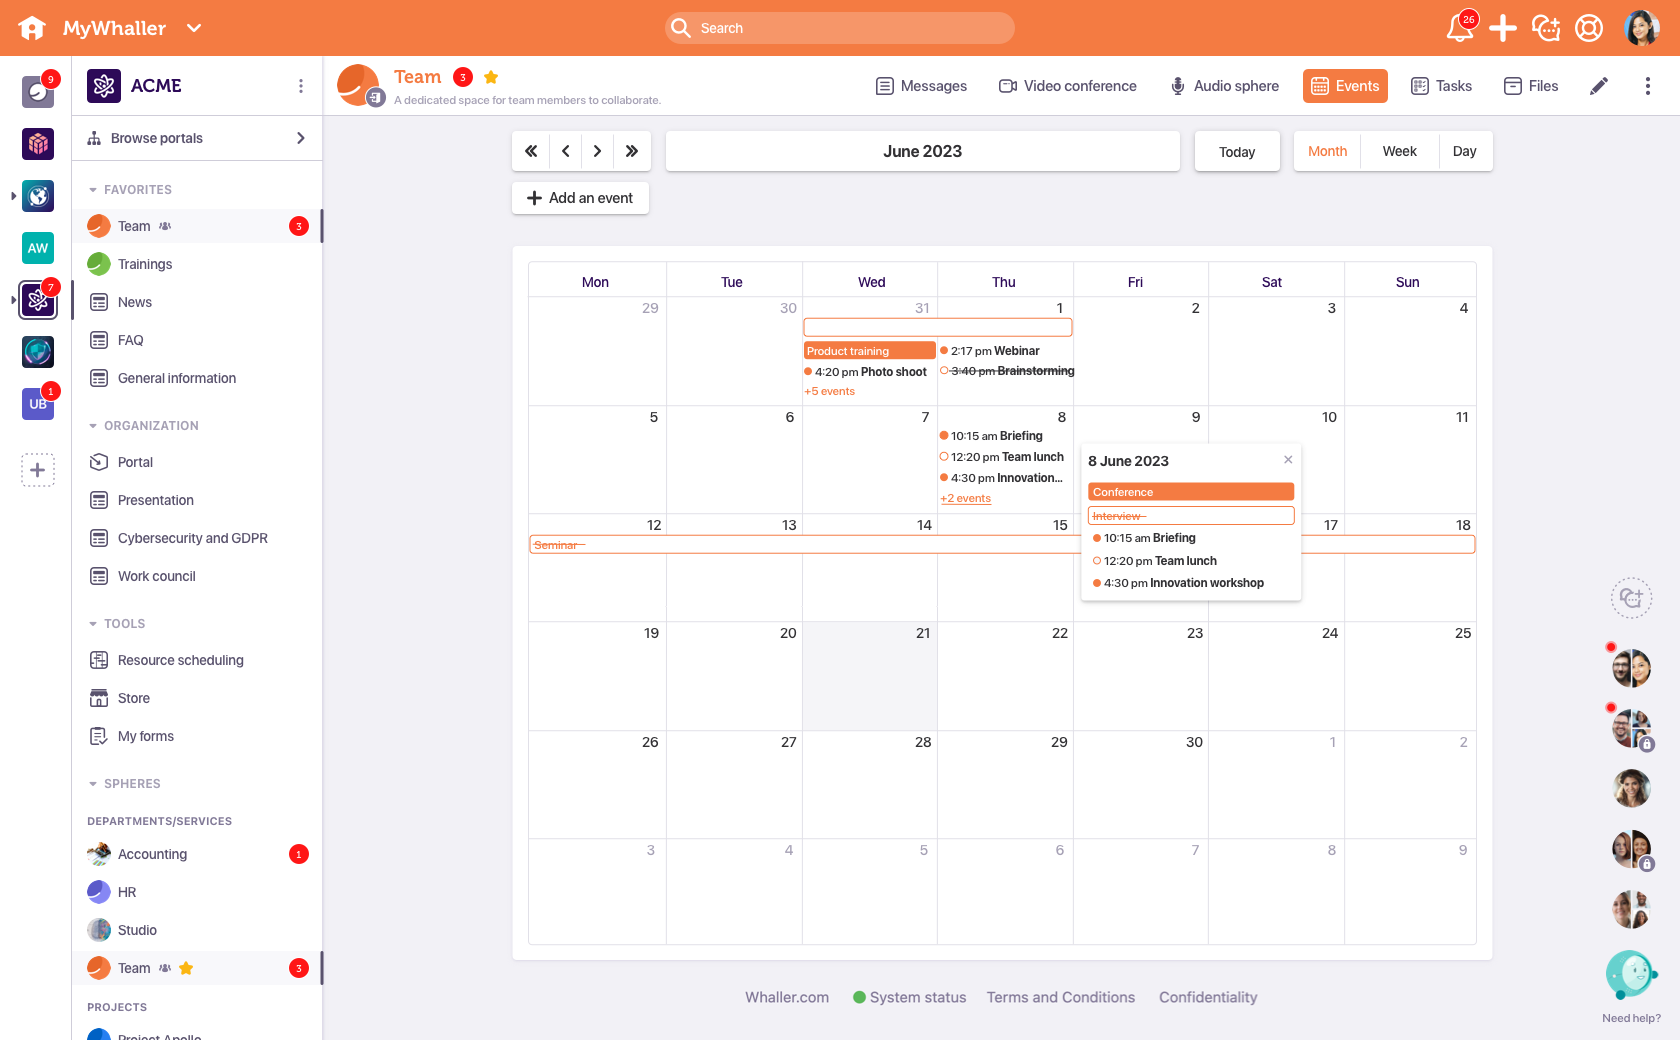 Network members can create events, manage RSVPs and see upcoming engagements on shared calendars.